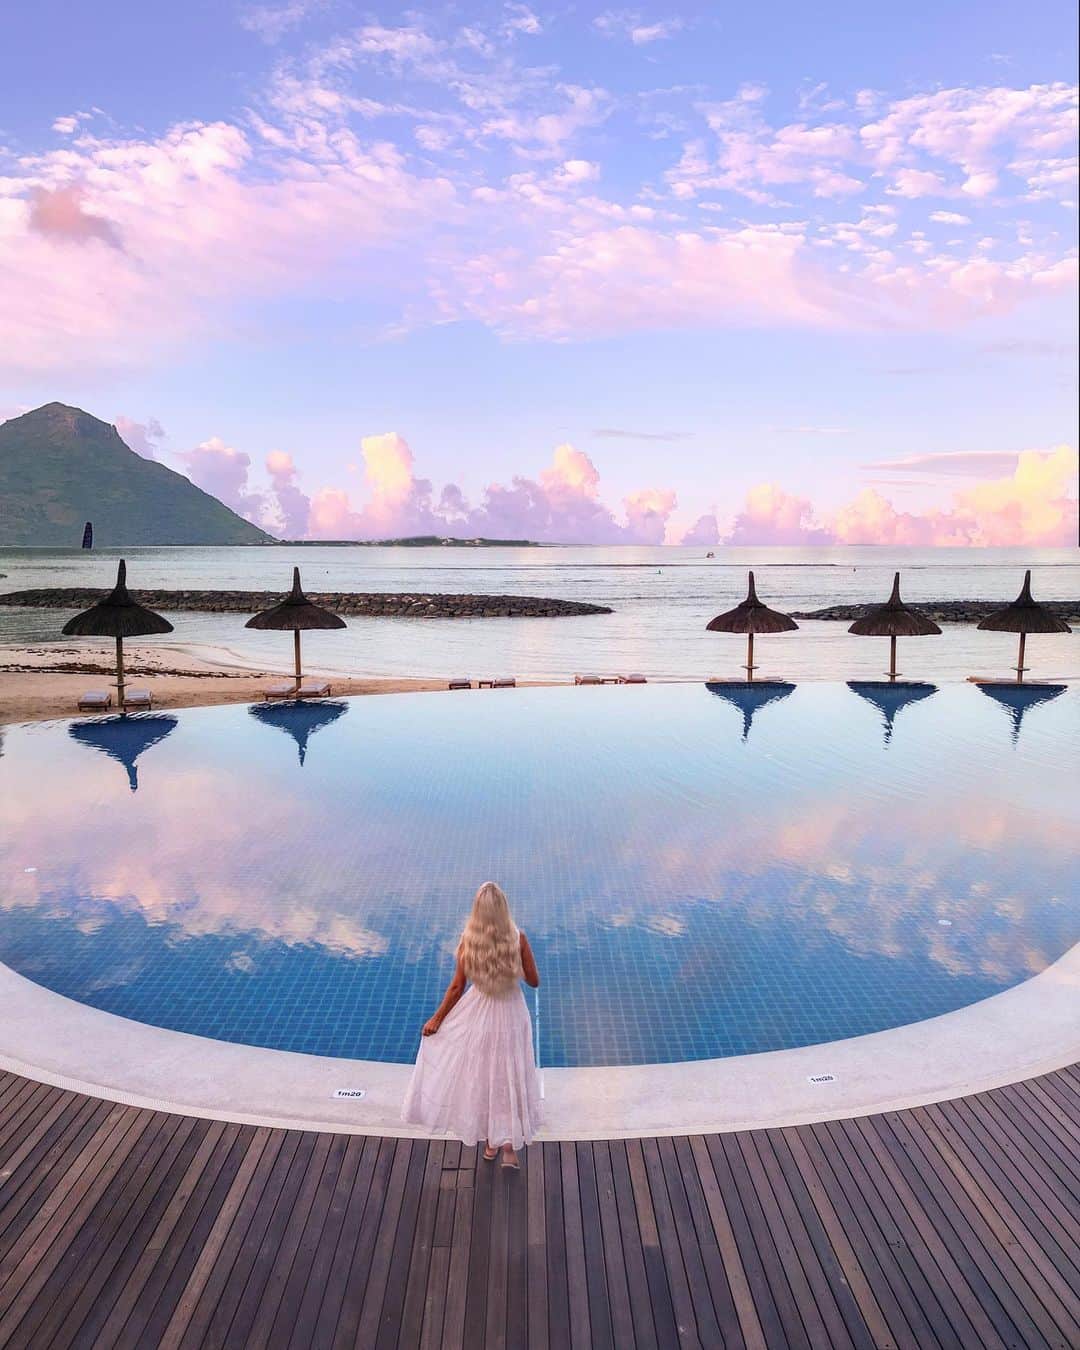 のインスタグラム：「A collection of the beautiful resort views from my trip to Mauritius 🏝️ @mauritius.tourism ✨ Which is your fave 1, 2, 3, 4….10?  My first stay was in Flic en Flac @sandssuitesresortandspa then to the south western tip to Le Morne @paradisbeachcomber and then north to @theoberoimauritius 🌊  Each resort and each location brought something special and unique to this trip. The @sandssuitesresortandspa was ideally located not too far from the airport and also within reach of exploring the Black River region. These morning sunrise views were beyond breathtaking. @paradisbeachcomber sits on an idyllic beachfront of white sand and turquoise water with the grandness of Le Morne Brabant in the background. There is so much to do in this area from exploring Chamarel, visiting the Seven coloured earth Geopark and waterfall, rum tasting at a rum distillery and taking a seaplane from La Prairie beach to view the underwater waterfall illusion 🪸  About an hour away is Blue bay marine park, a turquoise dream where you can snorkel and even take a day trip on a catamaran to Ile aux Cerfs - a dreamy island paradise that even has a waterfall 🏝️   As you venture north to @theoberoimauritius you’ll get the chance to stop and explore the Hindu Sacred water temple in Grand Bassin and take in the majestic views. Another must stop is @escalecreole for some delicious authentic creole food right in the home of the most beautiful locals.   Once you reach the Oberoi resort you might not want to leave. It has the best snorkeling right there and wild dolphin and turtle swims straight from the boathouse 🐢   All my stays, tours, where to eat and travel tips are now on my blog {link in bio} so you can start planning your island getaway ☀️   And if you’re Perth based you can now take a direct flight to Mauritius with @airmauritius and be in paradise before you know it ✈️  #MauritiusNow #mauritius #africa #luxuryresort #travelcommunity #perthblogger #airmauritius」